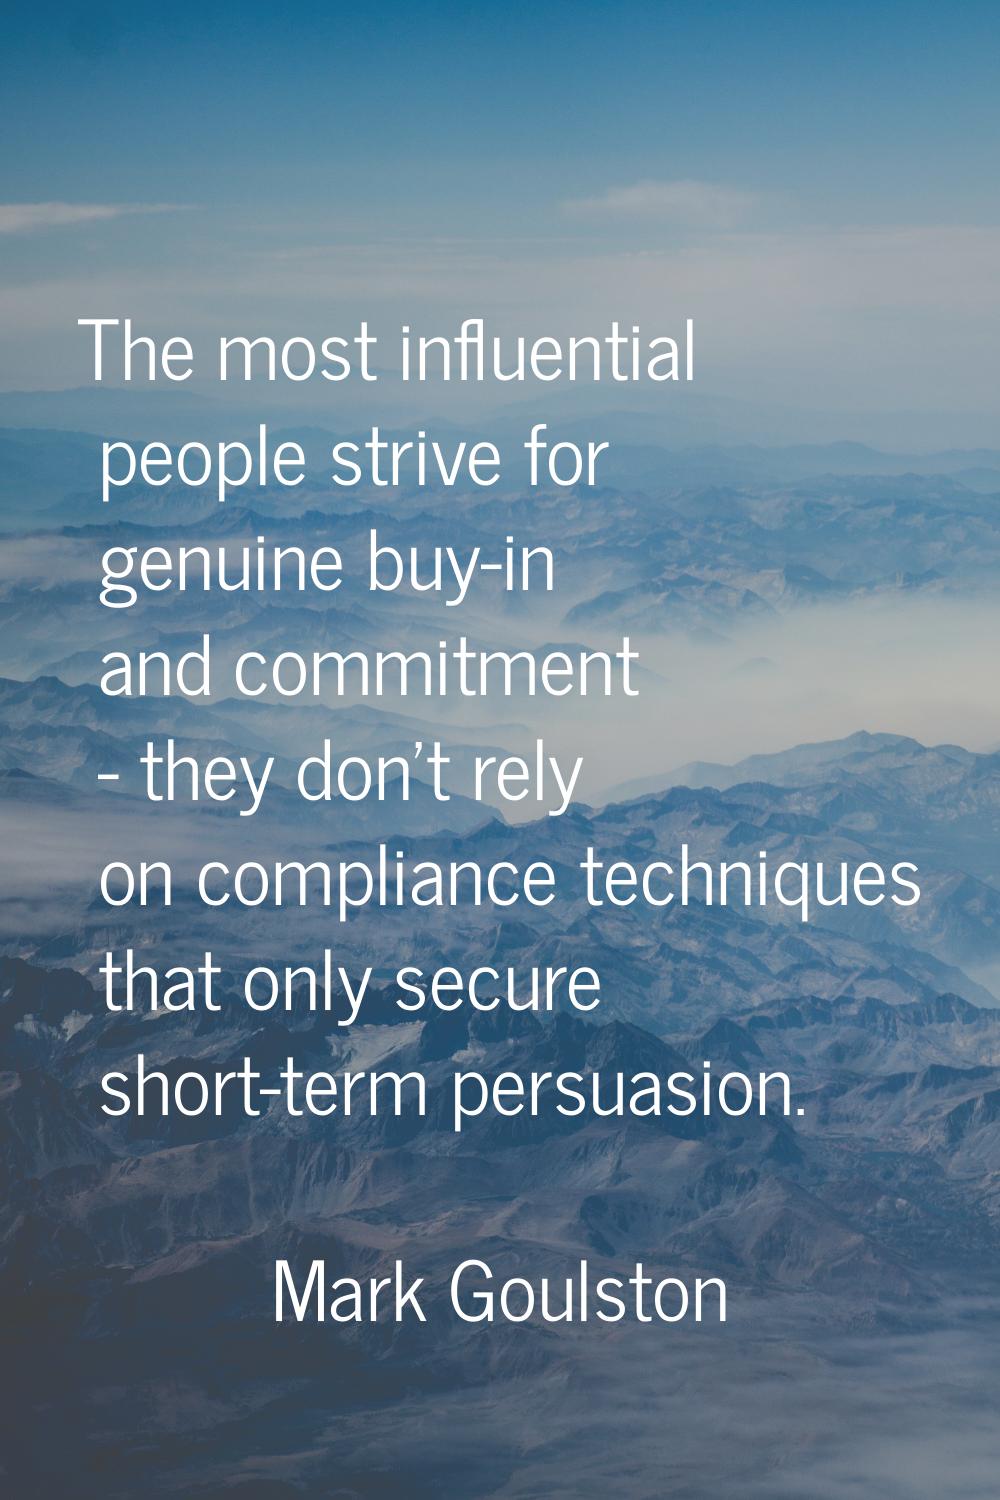 The most influential people strive for genuine buy-in and commitment - they don't rely on complianc